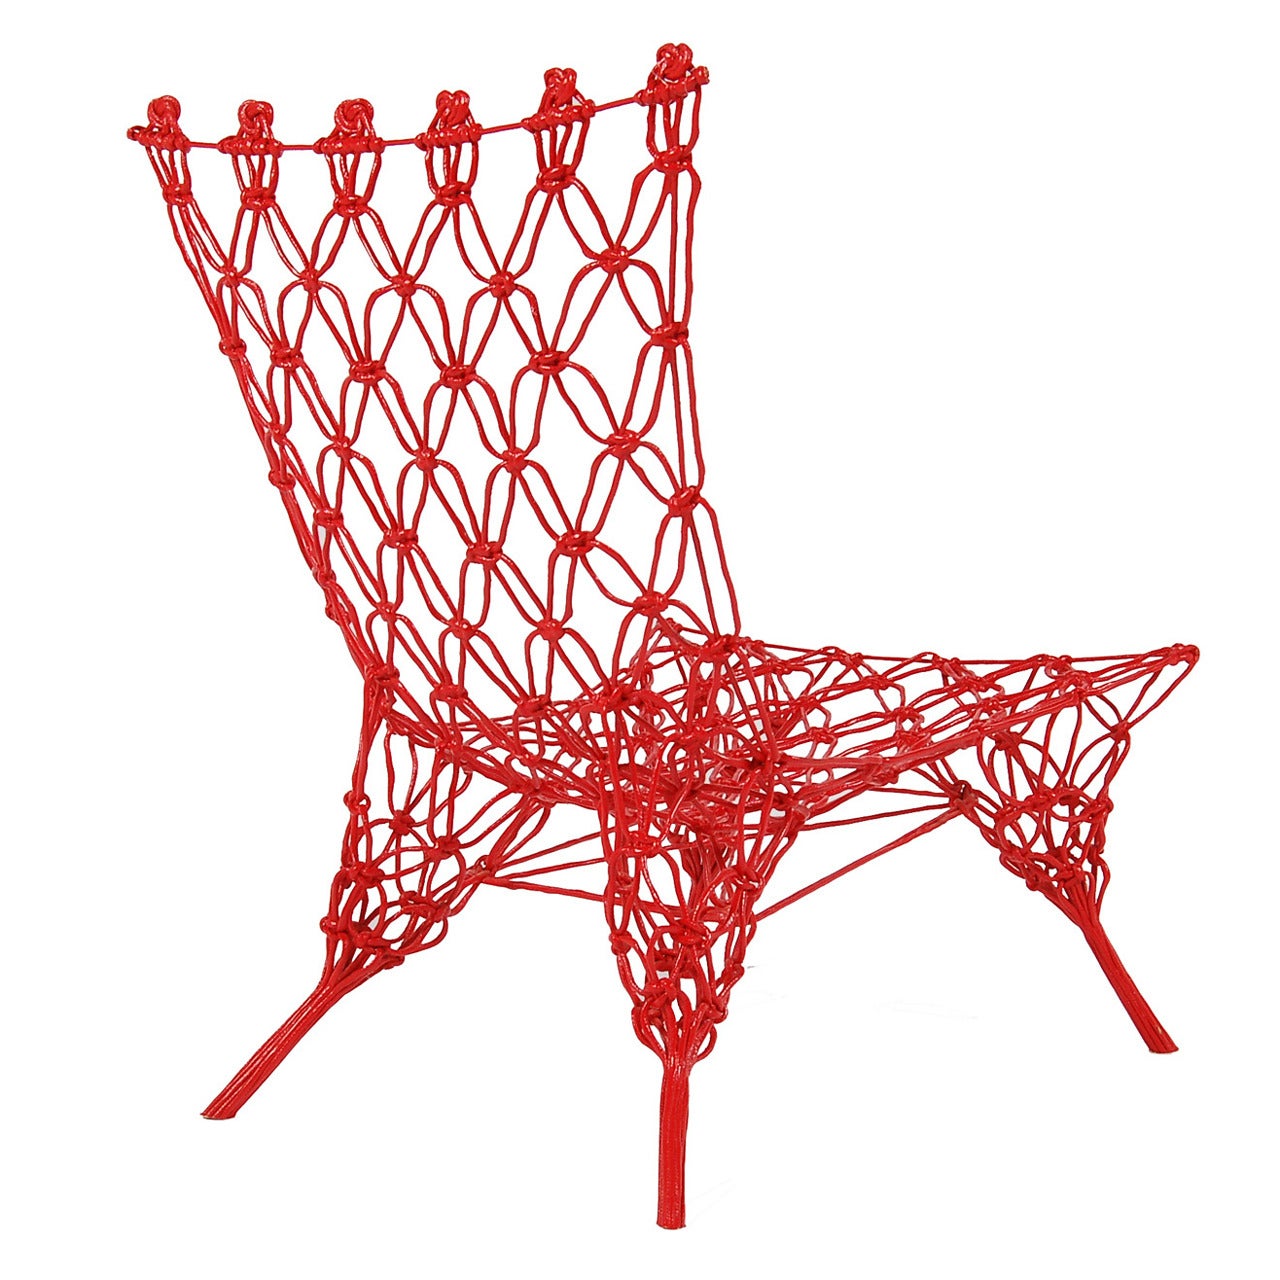 Limited Edition Rouge Knotted Chair by Marcel Wanders